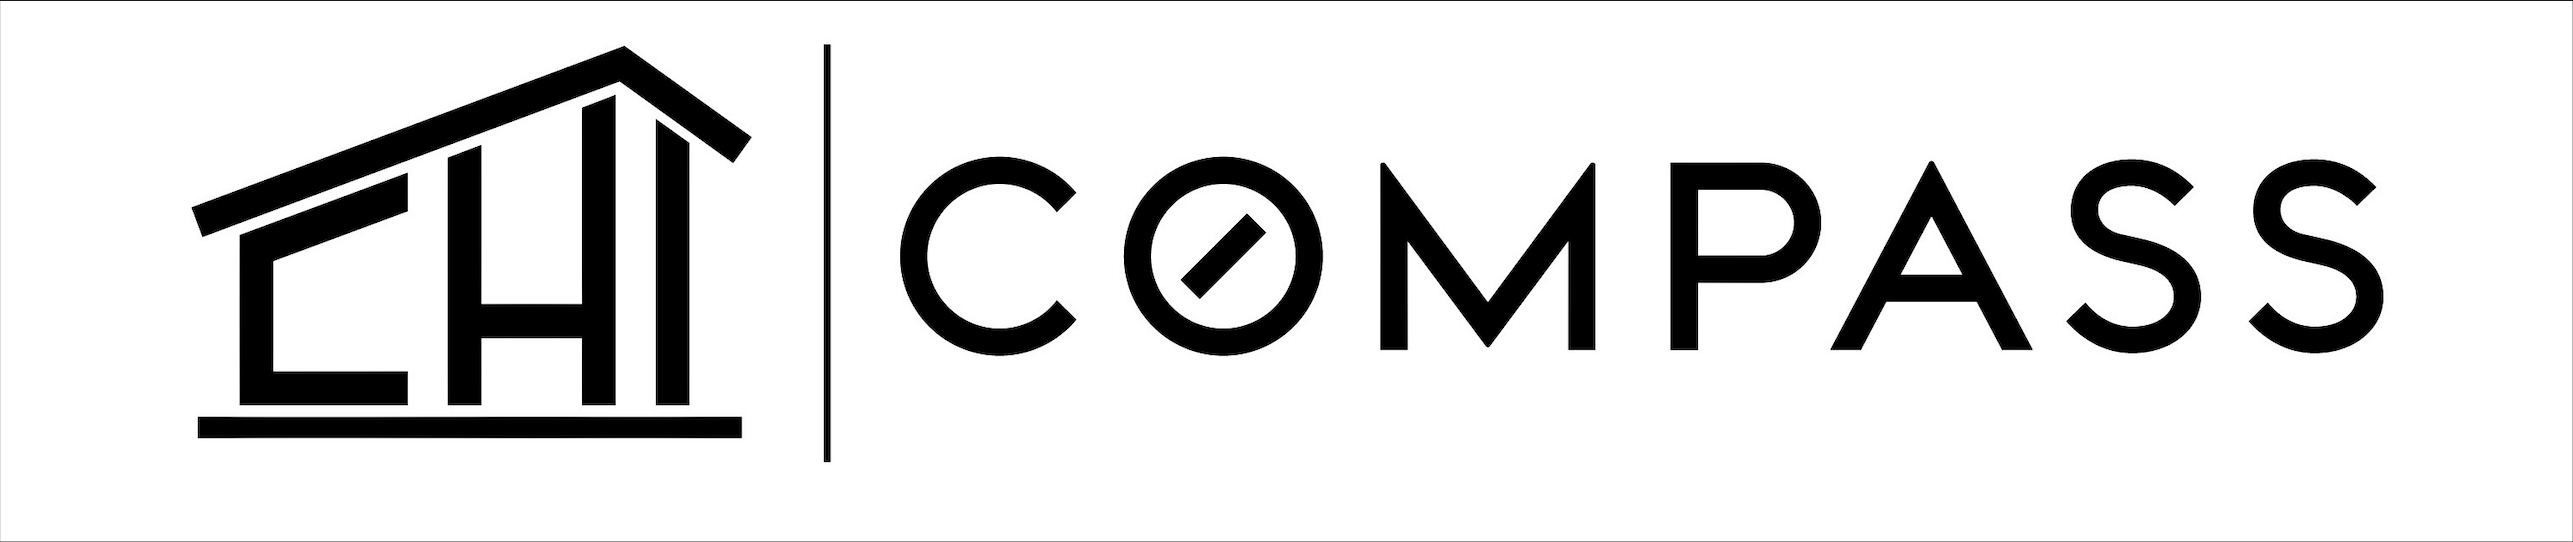 A text banner displaying the price of a Compass product.